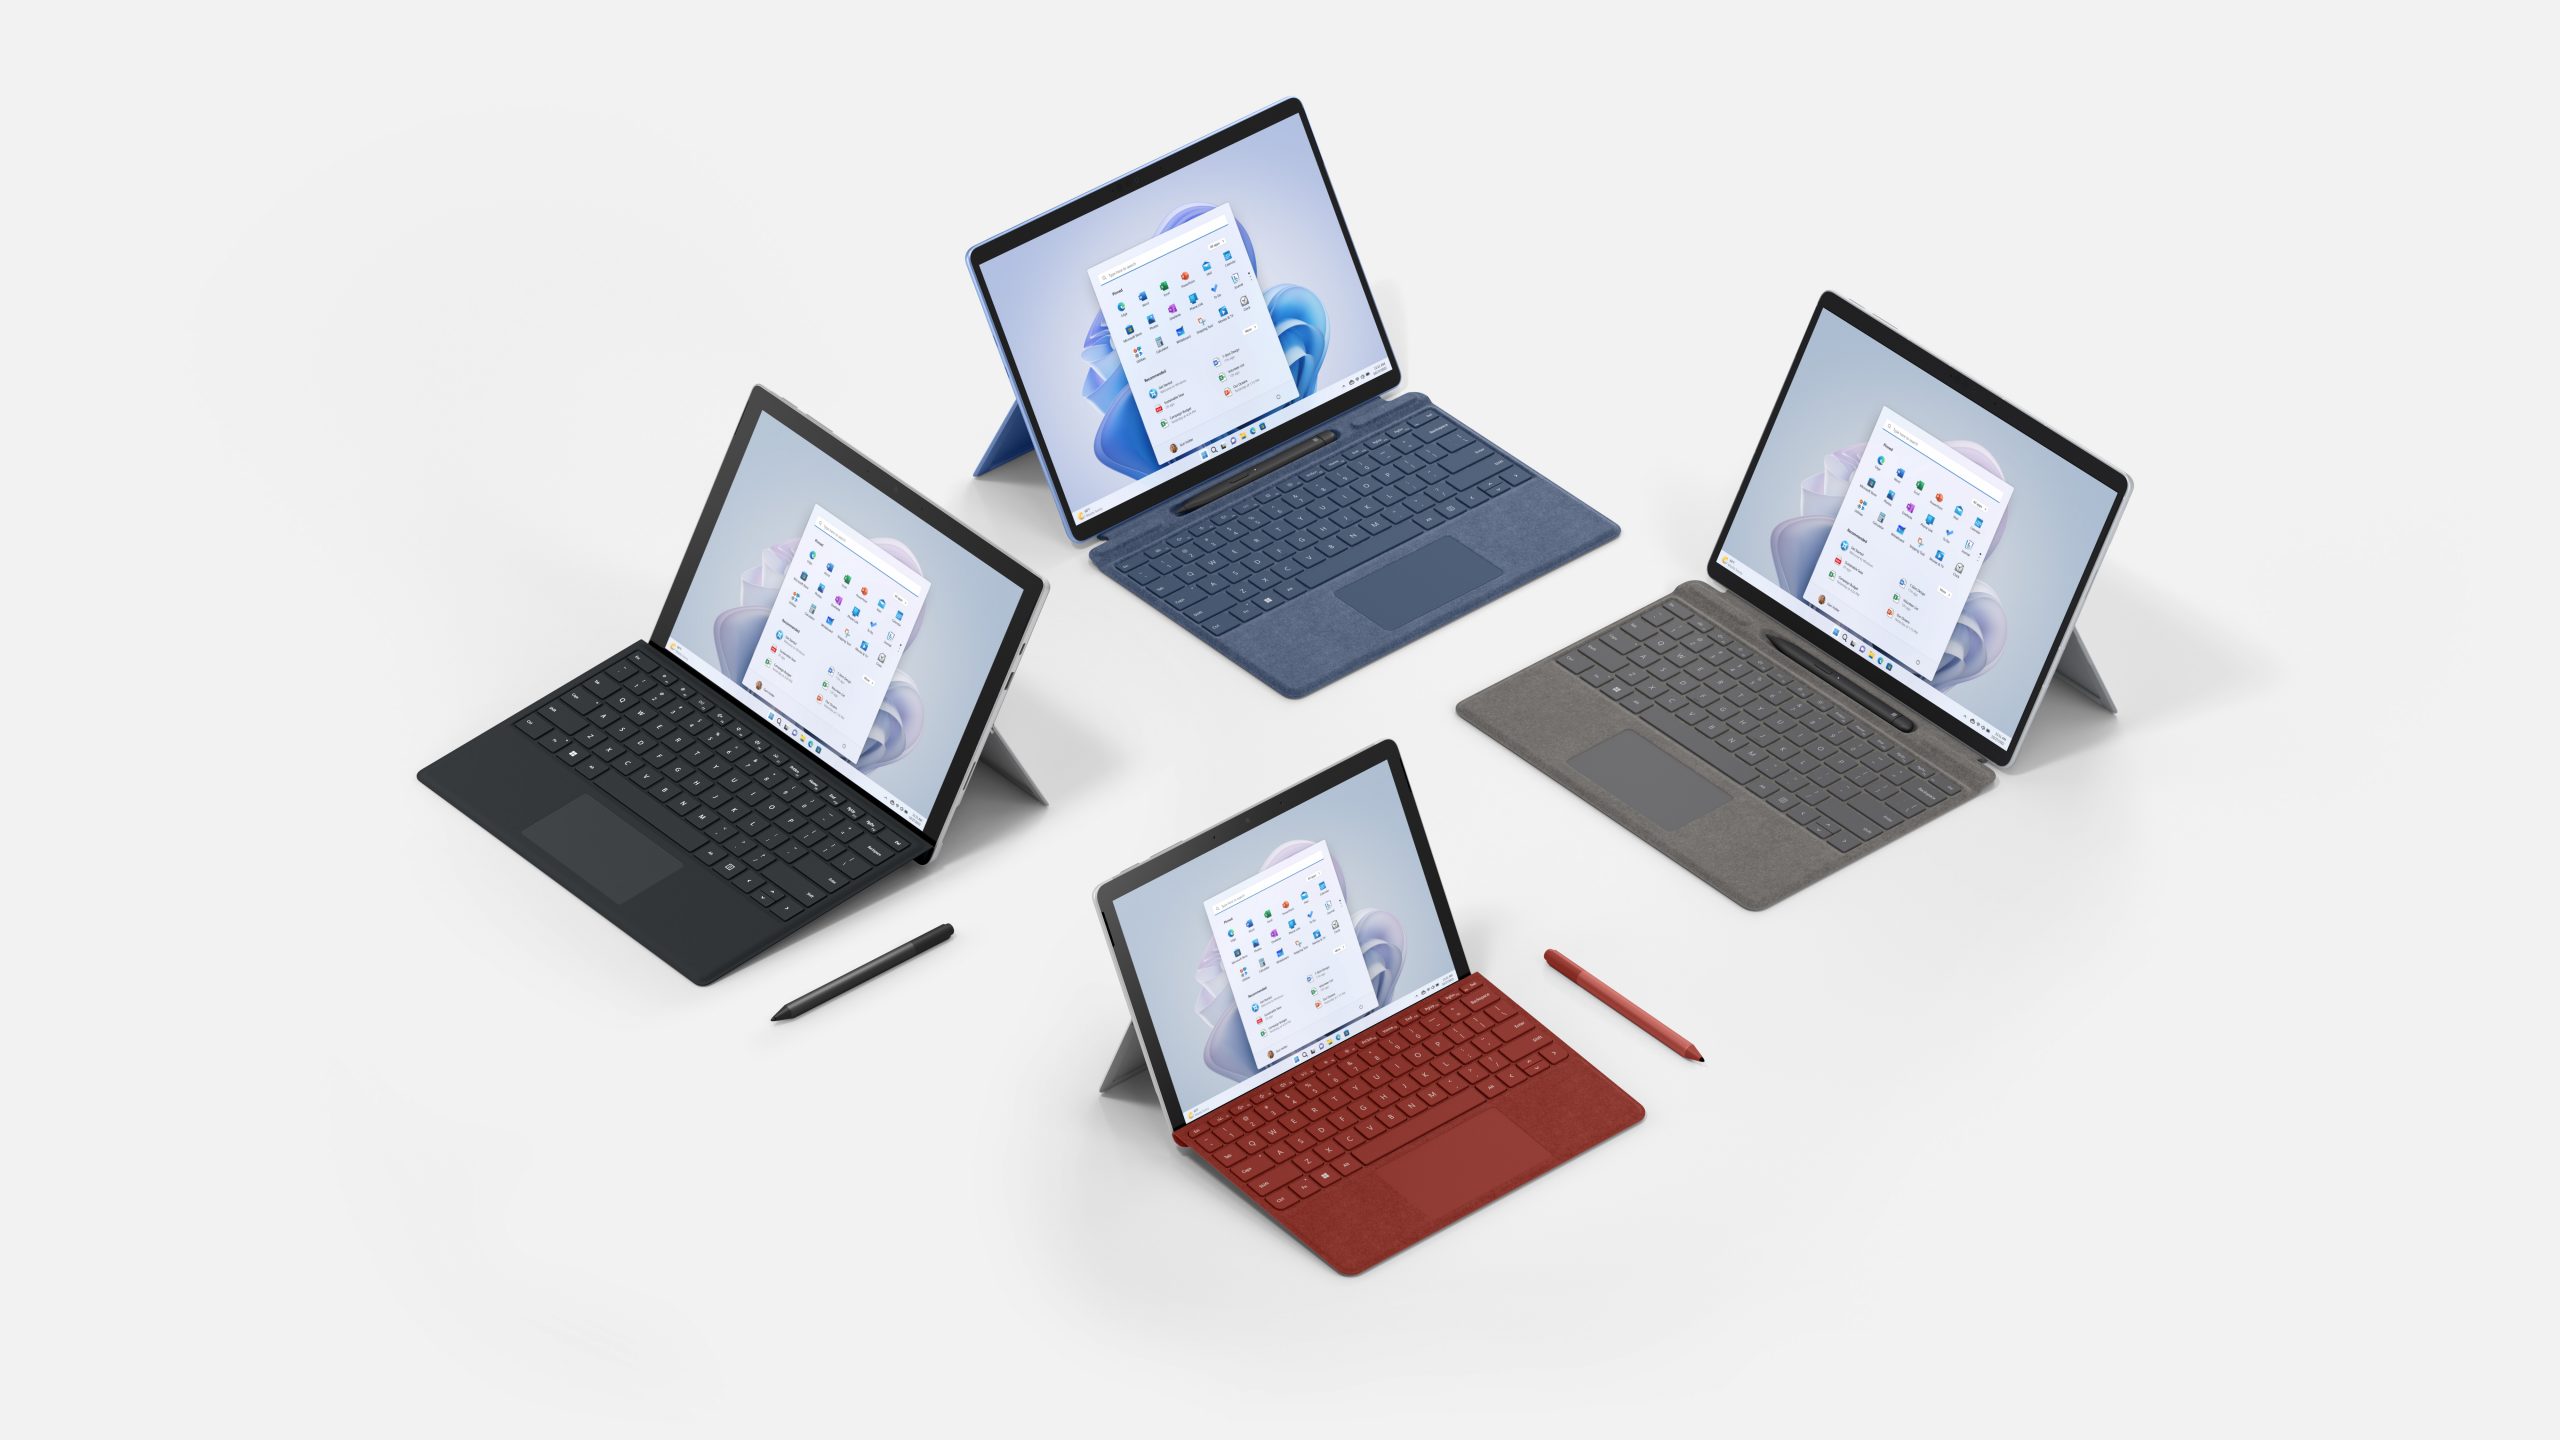 Feature render of Surface Pro 9, Surface Pro Signature Keyboard, Surface Slim Pen 2, Surface Pro 7+, Surface Pen, Surface Pro Type Cover, Surface Go 3, Surface Pen, Surface Go. Type Cover colors are Poppy, Graphite and Sapphire